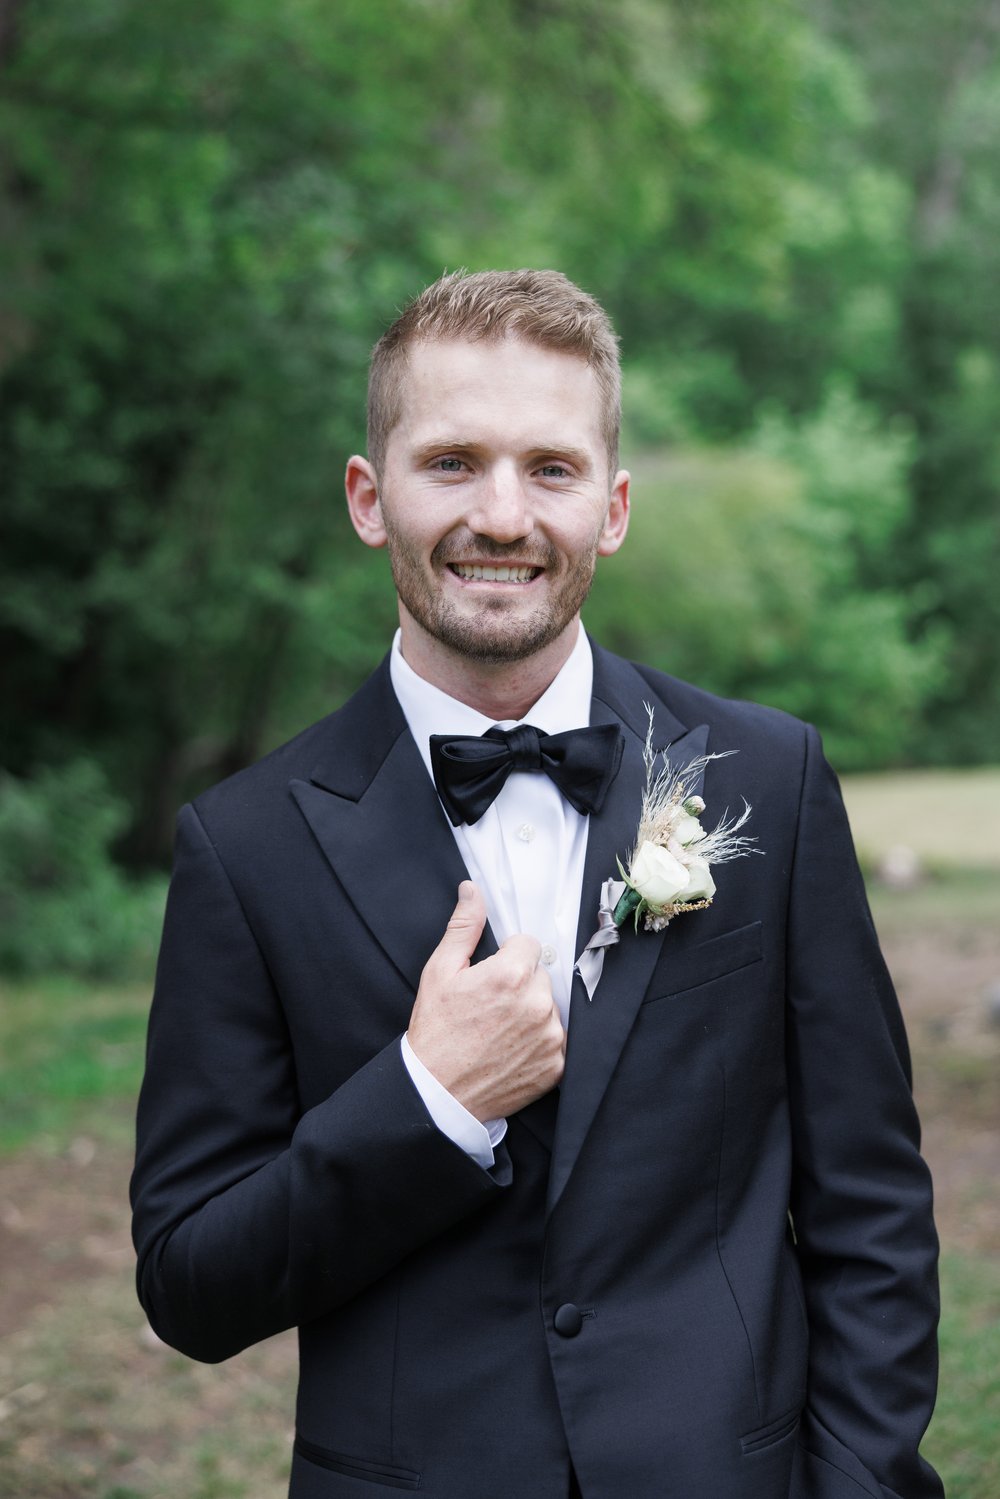  Groom in a black suit and bowtie smiles for a portrait captured by professional Savanna Richardson Photography. Mapleton weddings Utah groom #SavannaRichardsonPhotography #SavannaRichardsonWeddings #QuietMeadowFarms #MapletonUTweddingphotographers 